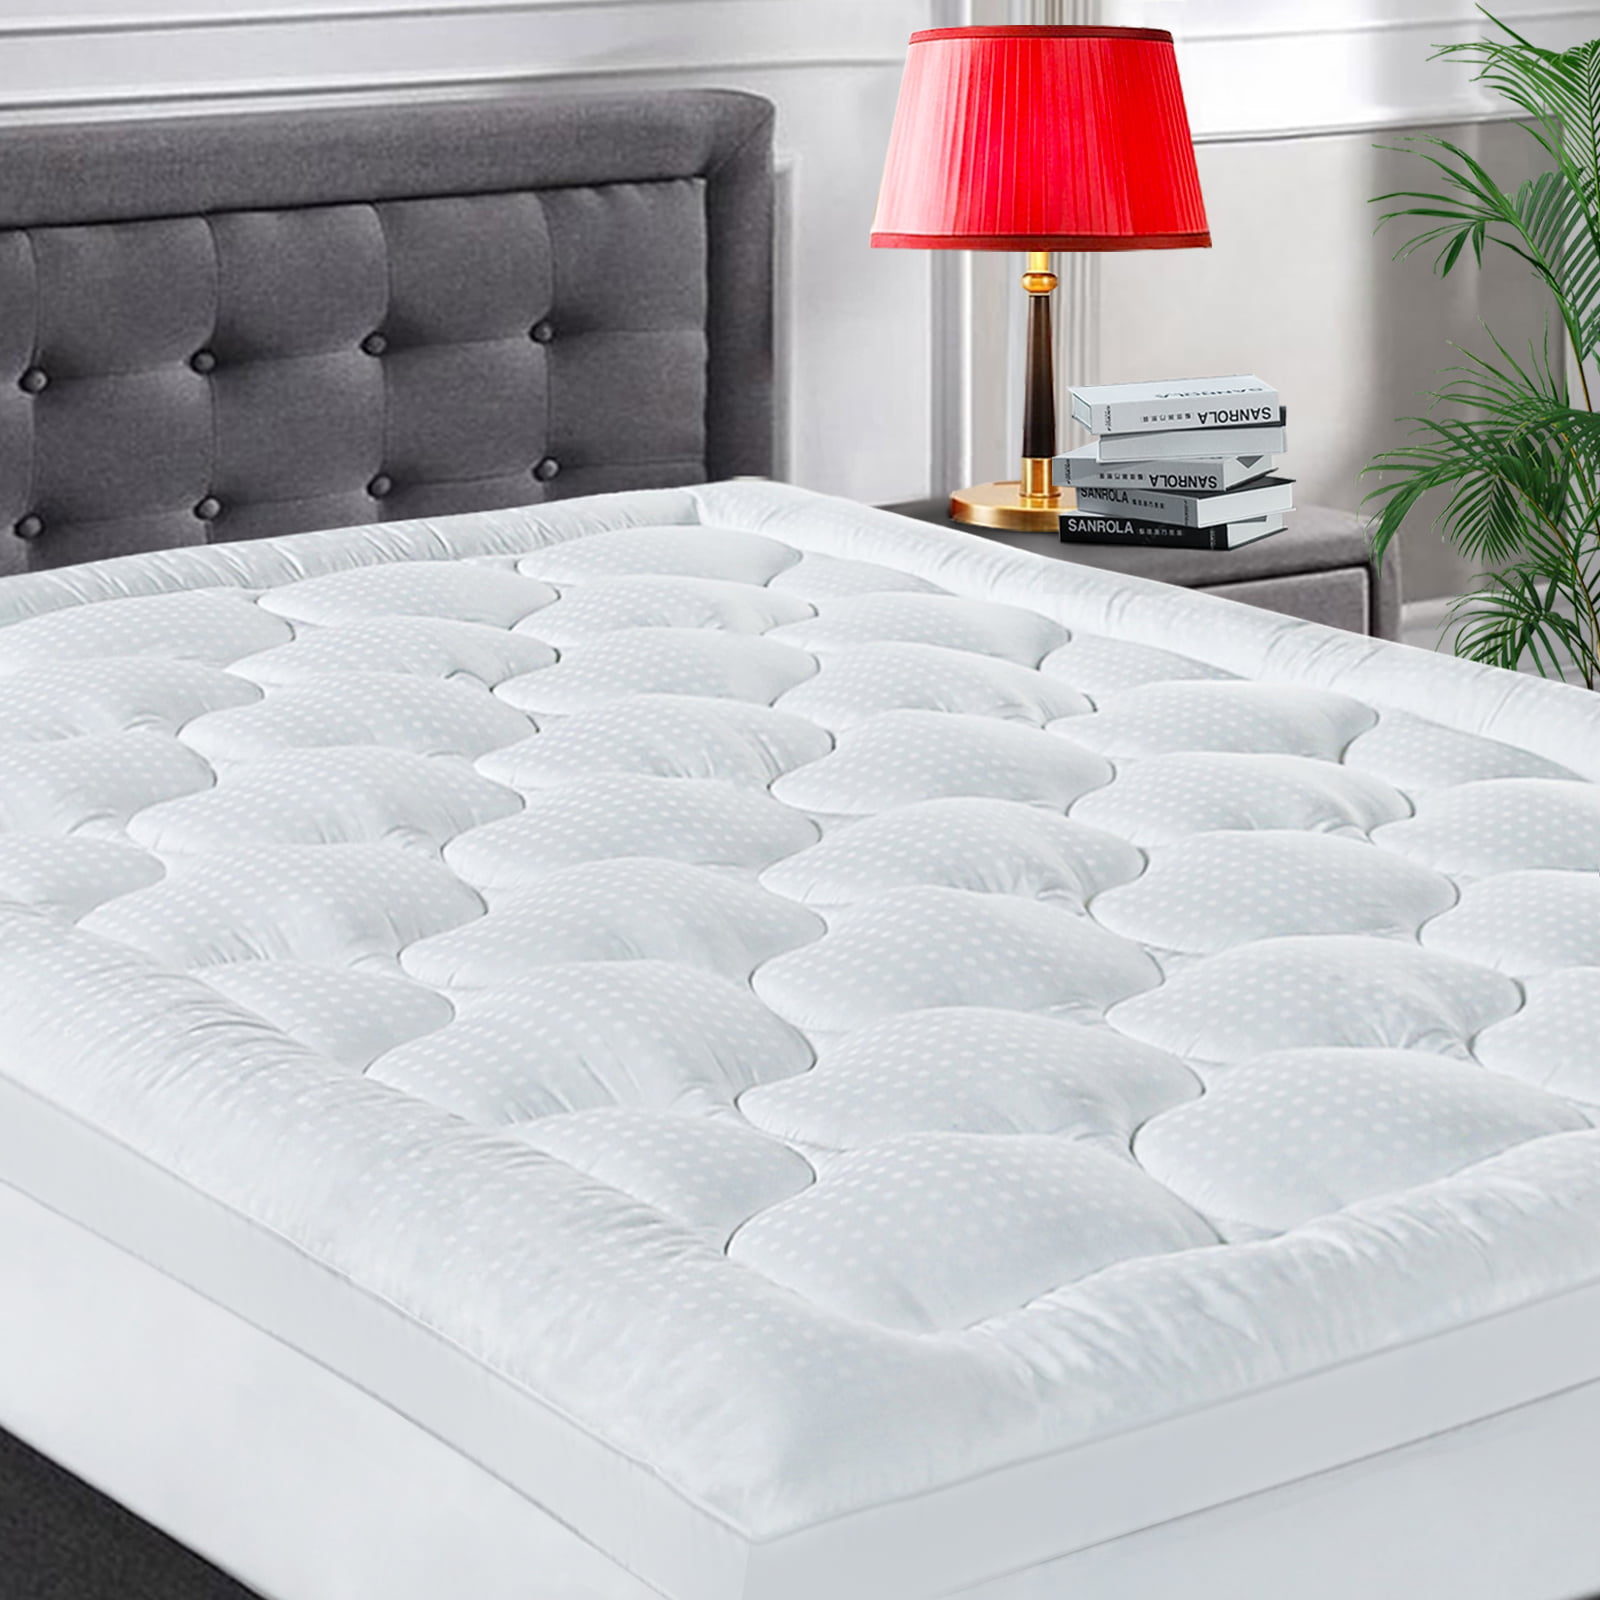 Details about   Plush Mattress Pad Hypoallergenic Polyester Quilted Cover Fitted Deep Pocket New 